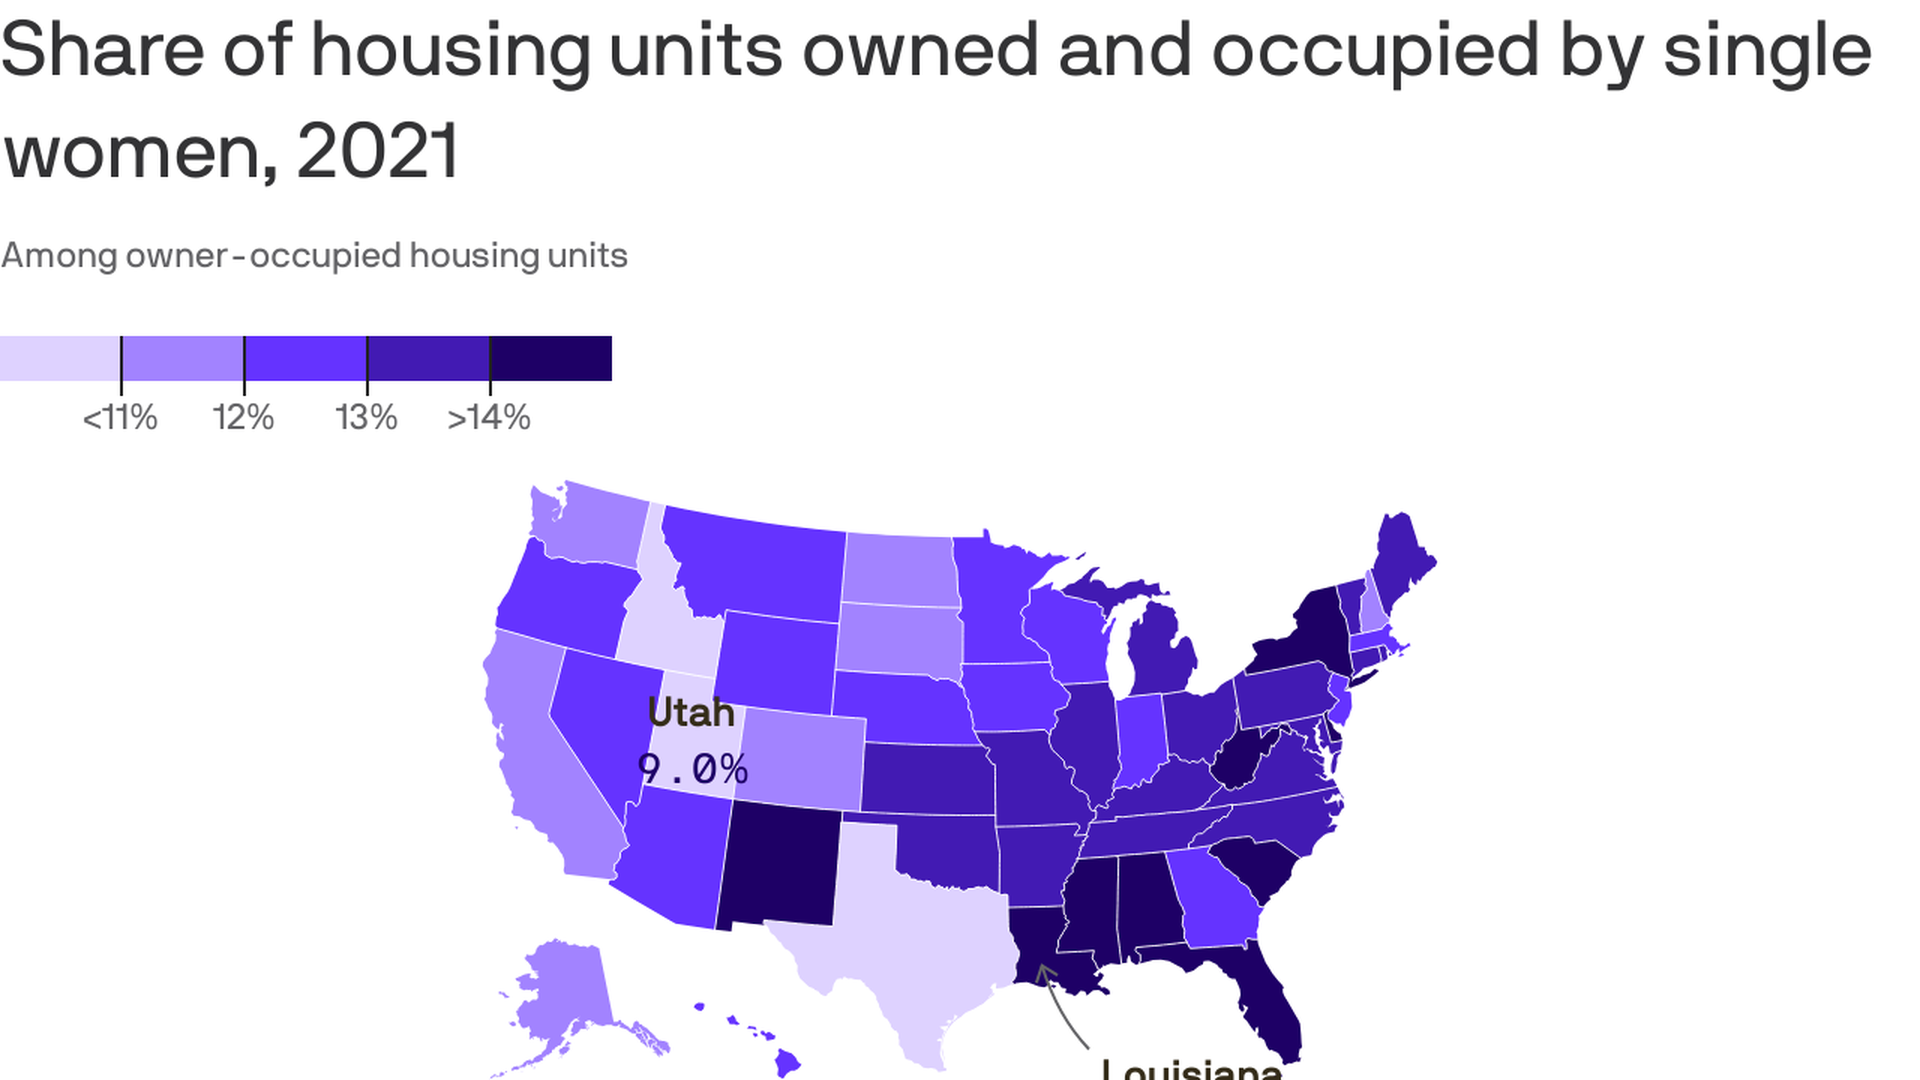 A map showing share of housing units owned and occupied by single women in 2021.